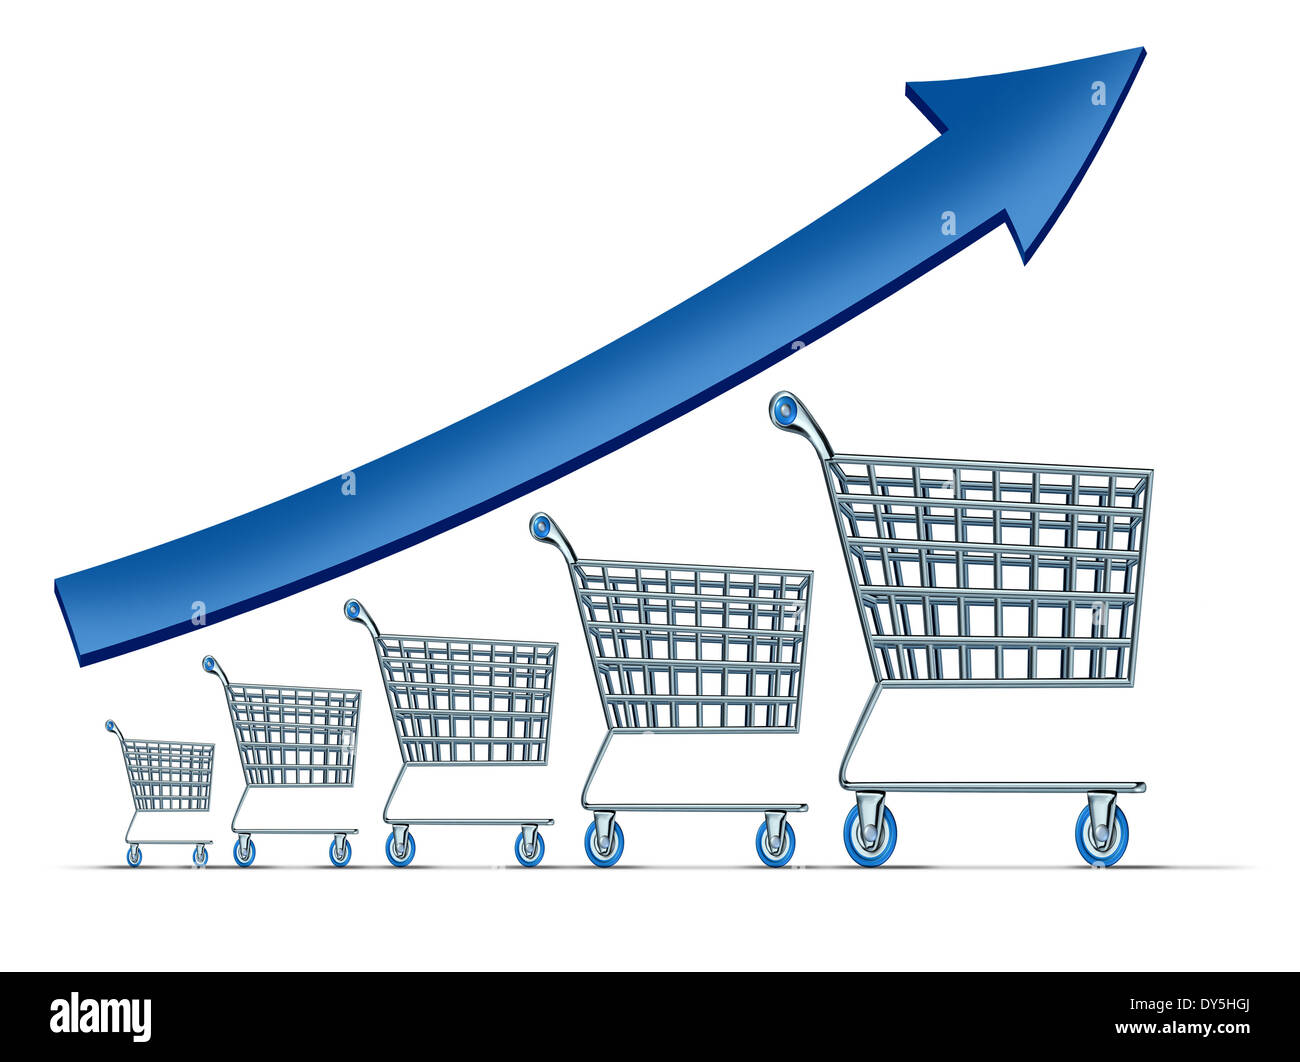 Sales increase symbol as a group of rising shopping carts with a blue arrow going up as a metaphor for successful commercial retail consumerism on a white background. Stock Photo